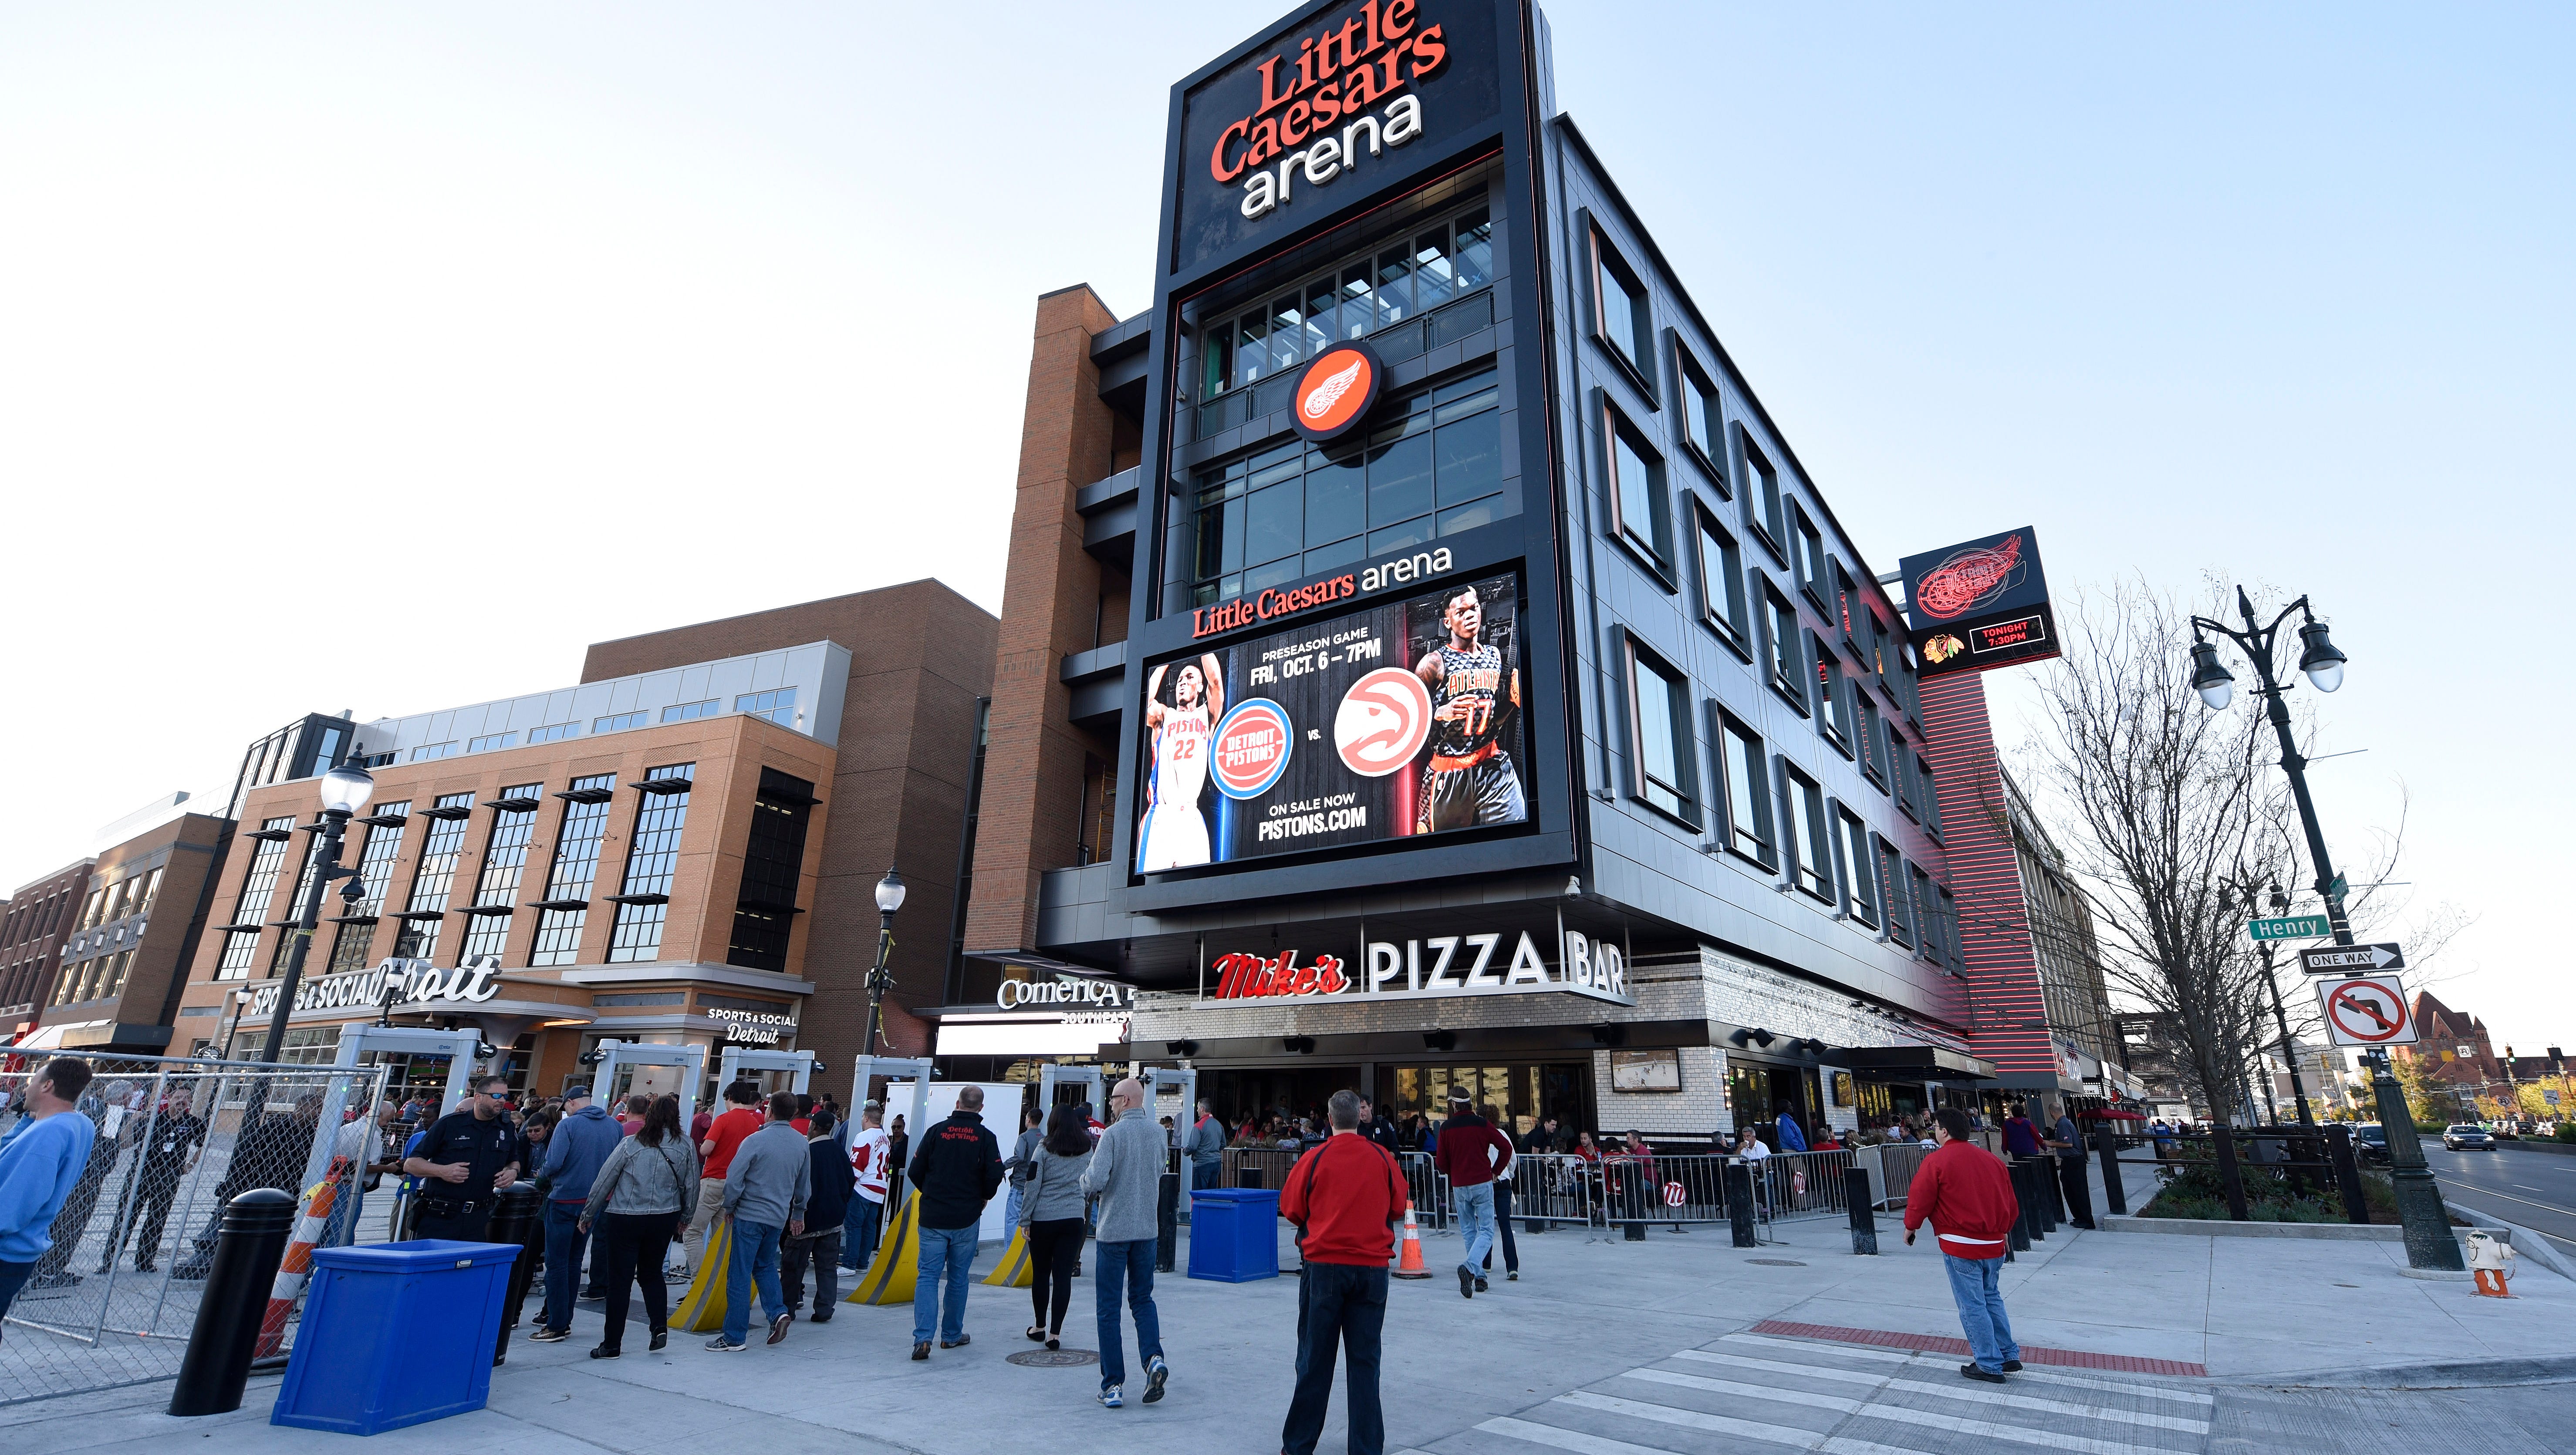 Fans arrive at Little Caesars Arena for a preseason Red Wings game.